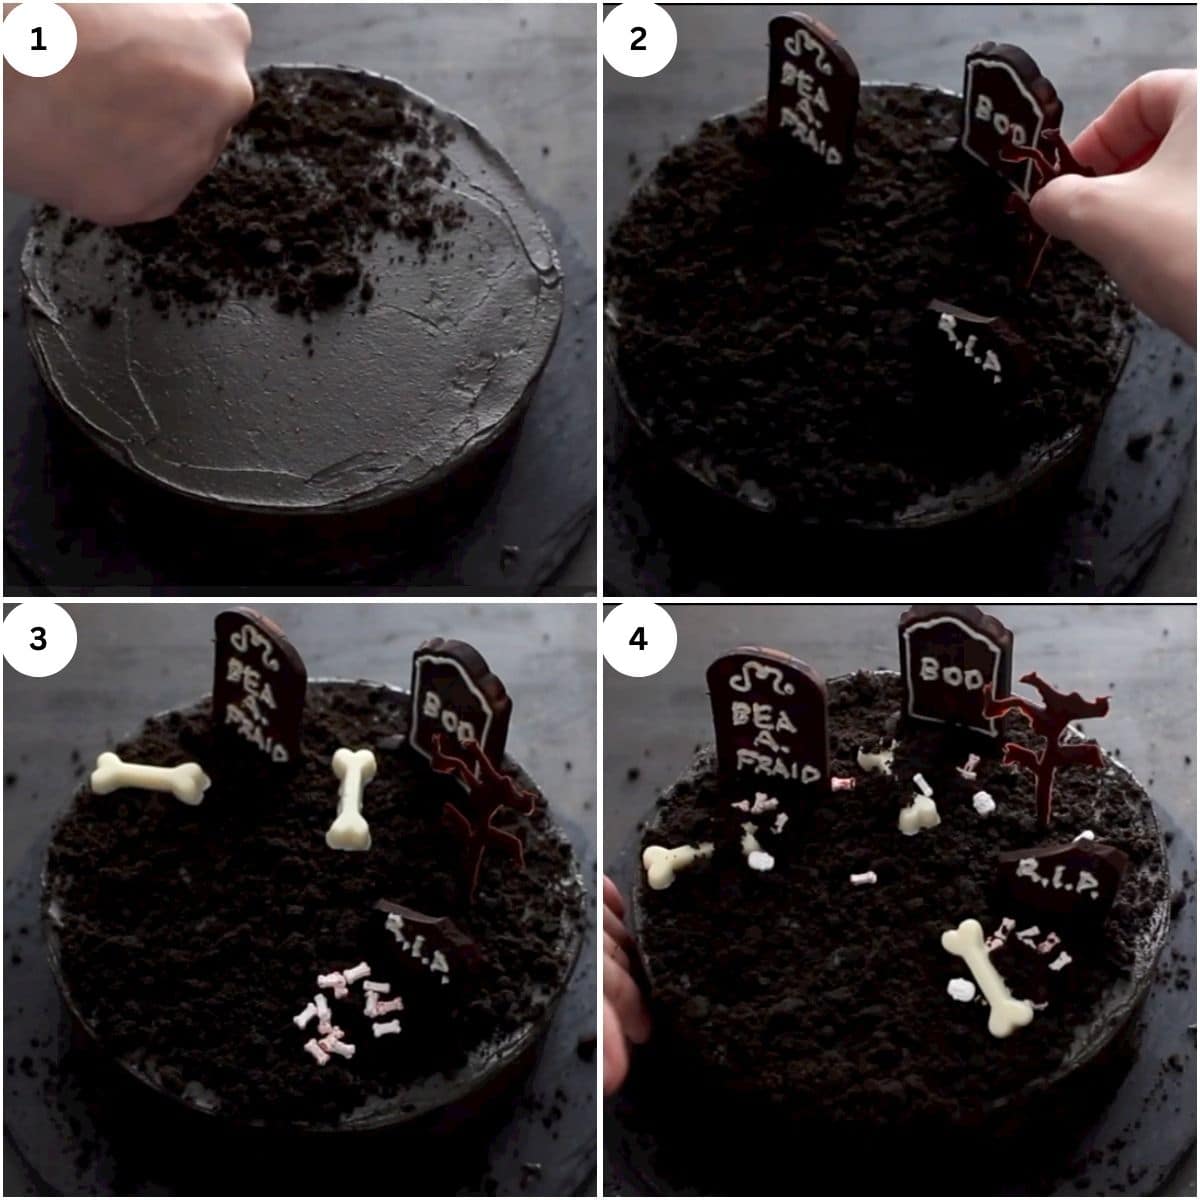 decorating the frosted chocolate cake